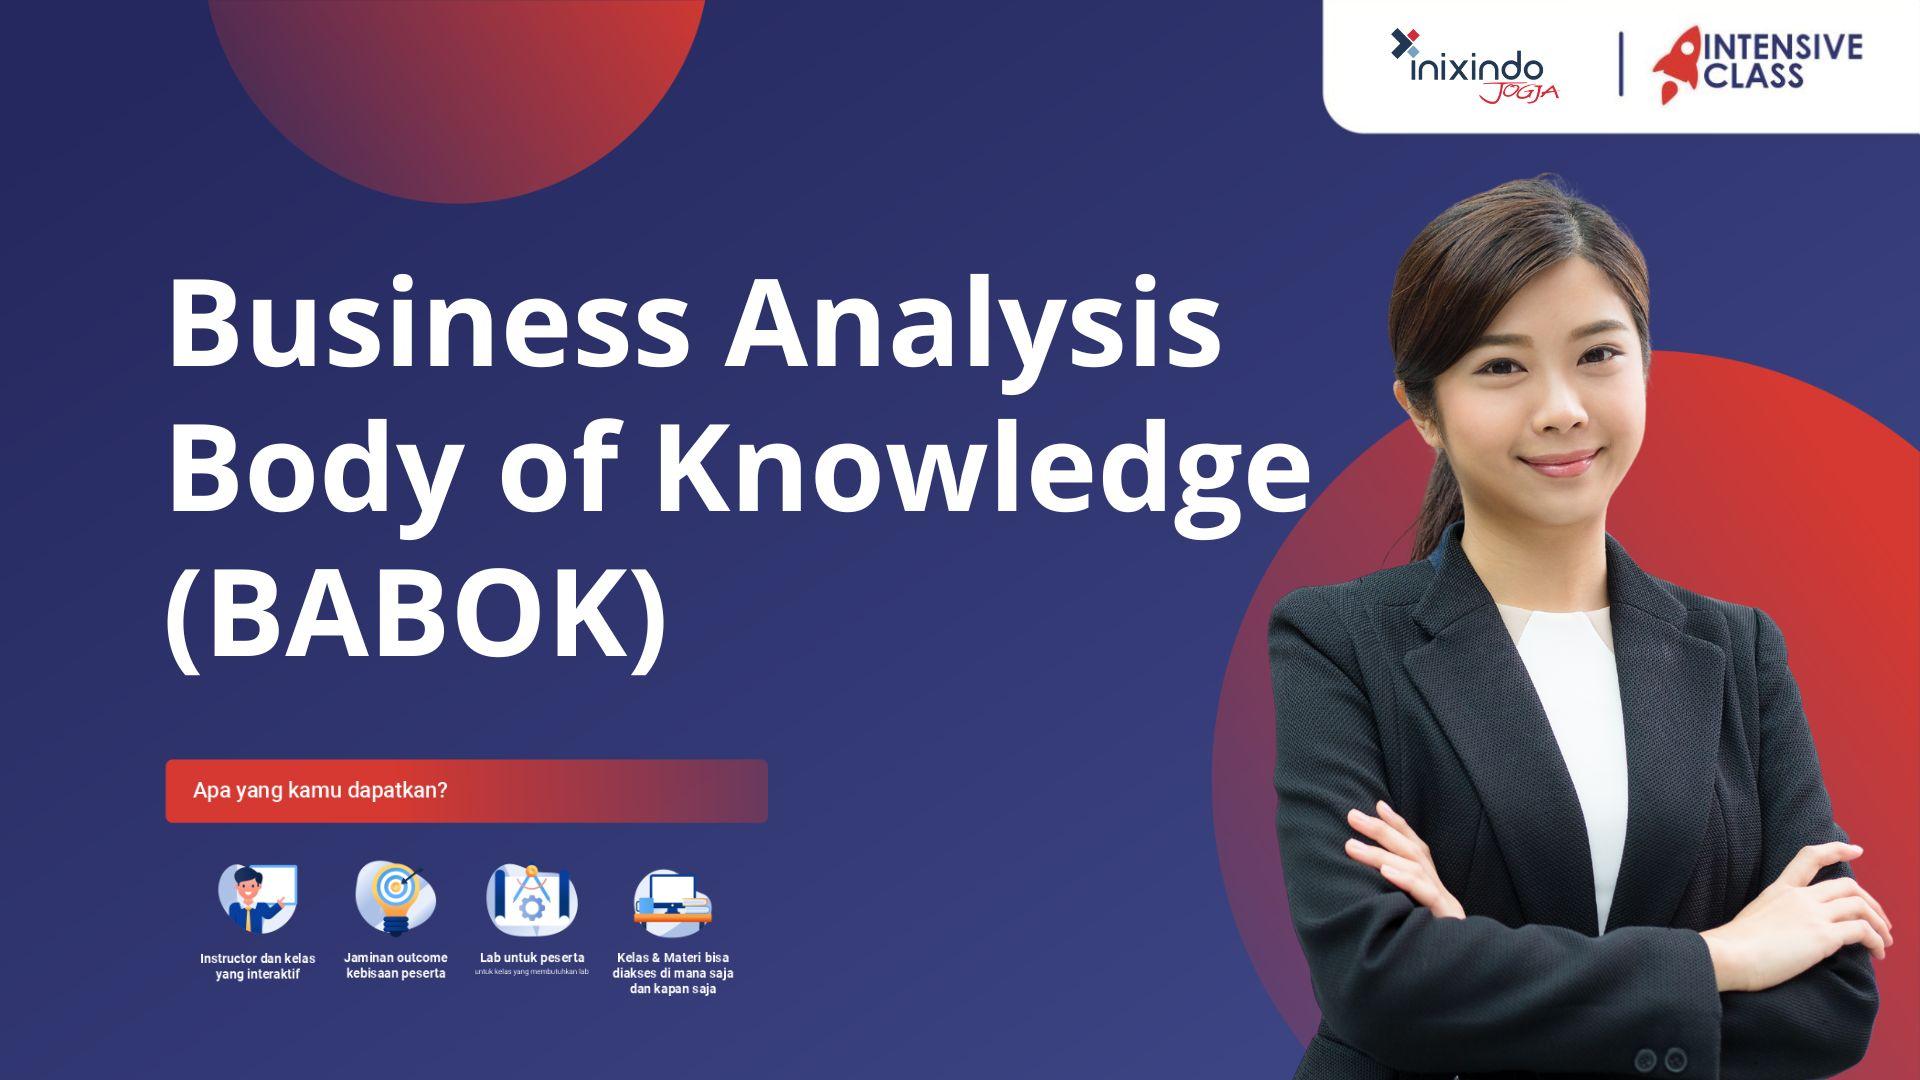 Business Analysis Body of Knowledge (BABOK) 14